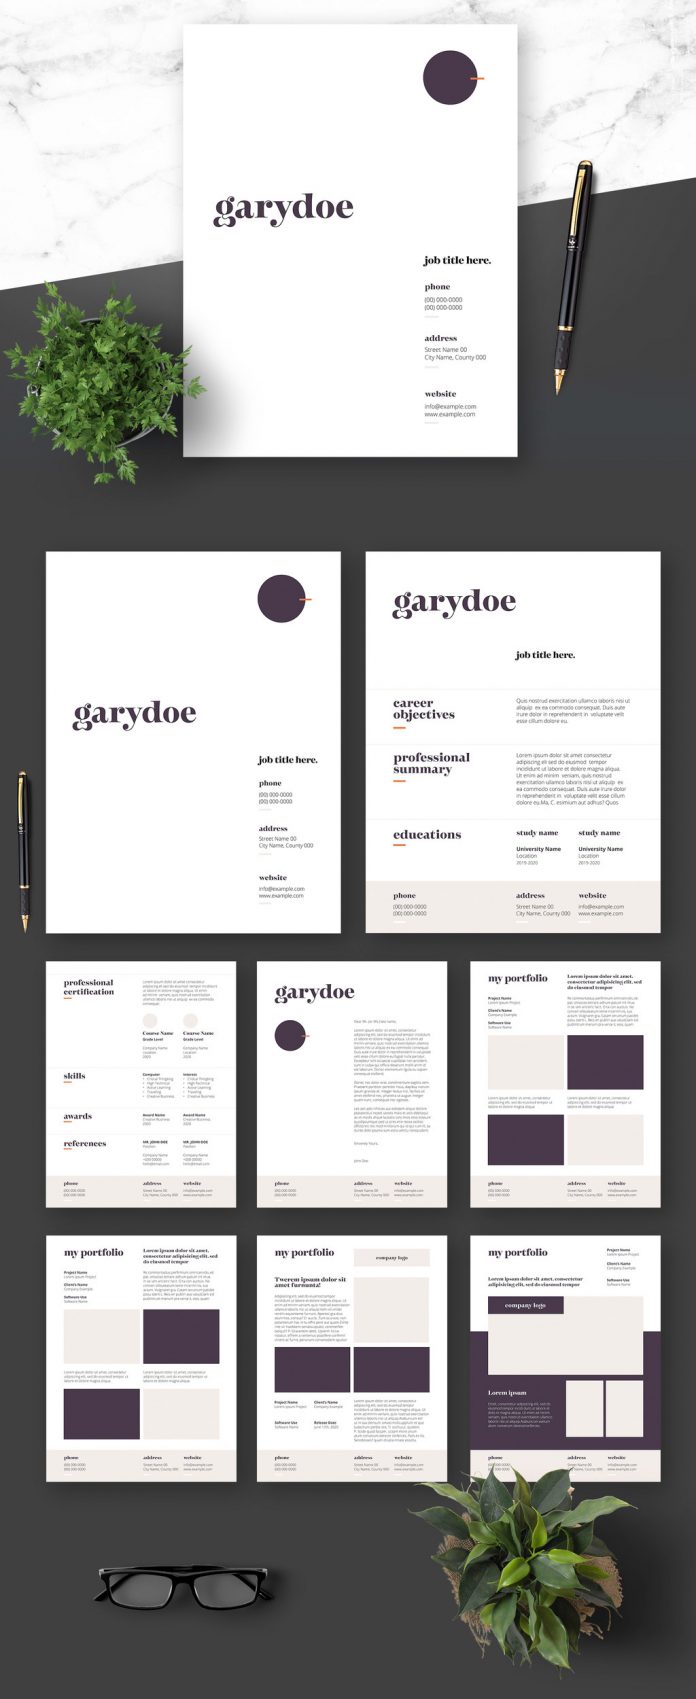 Adobe InDesign Resume Cover Letter and Portfolio Template with Dark Purple Elements